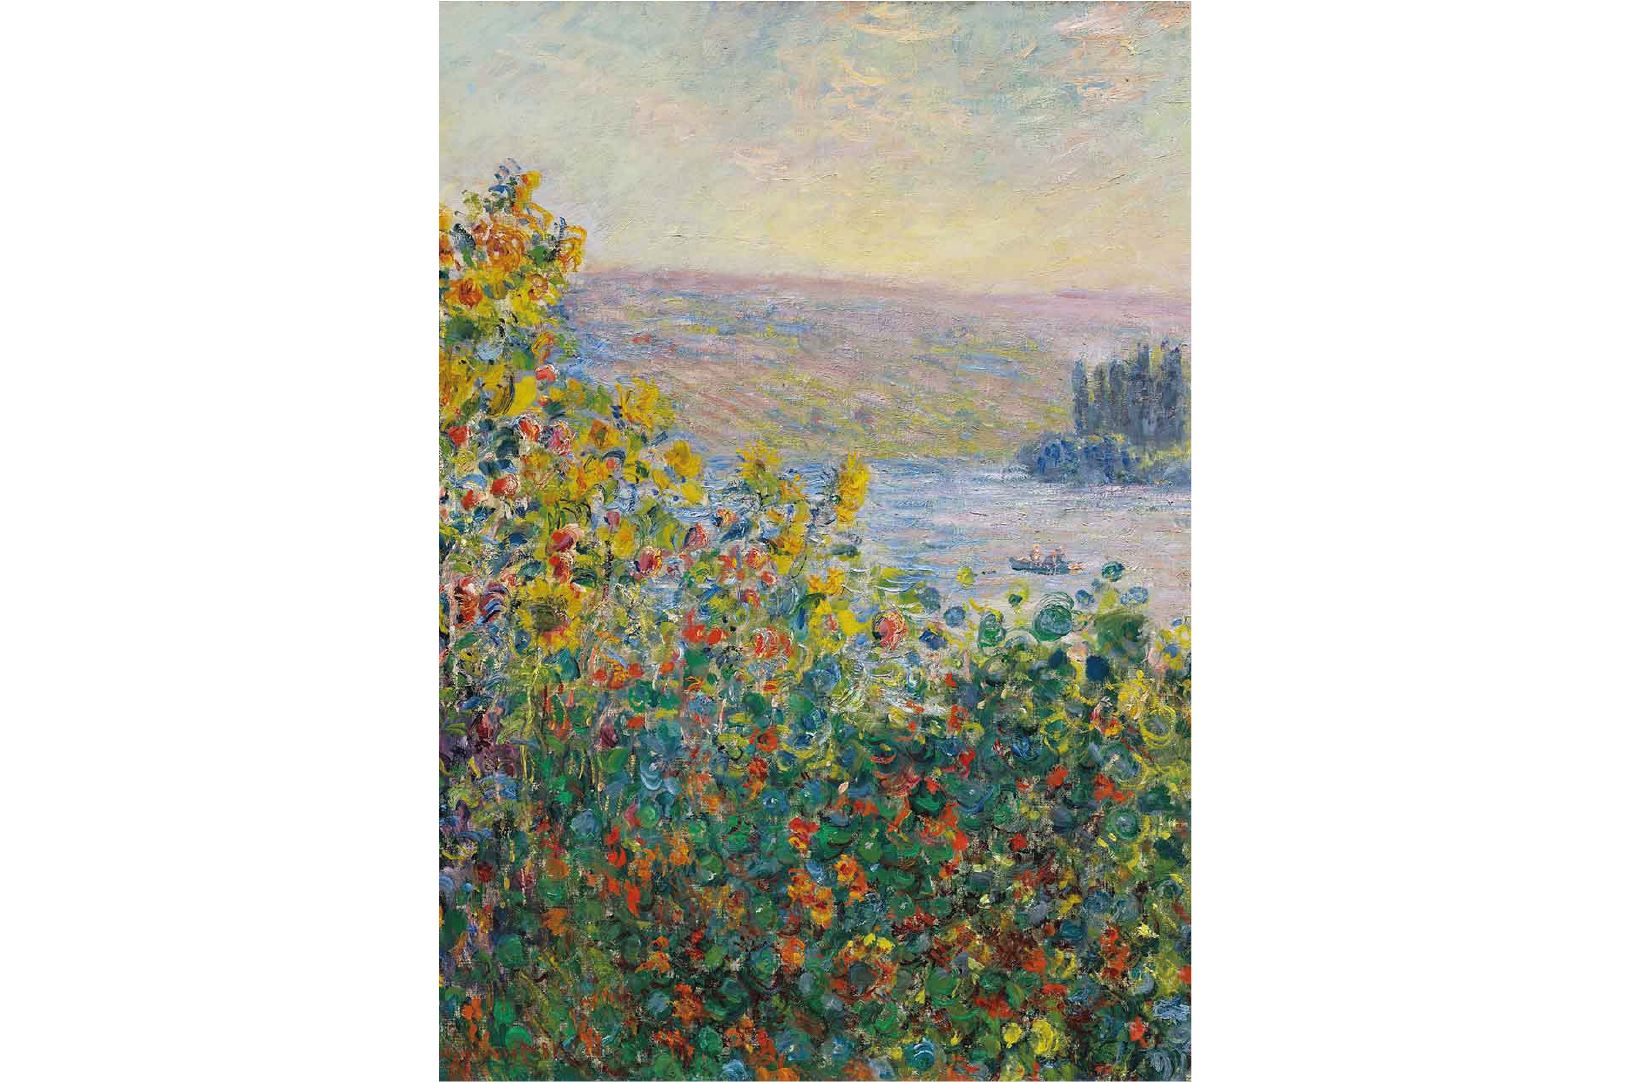 Flower Beds at Vetheuil by Claude Monet